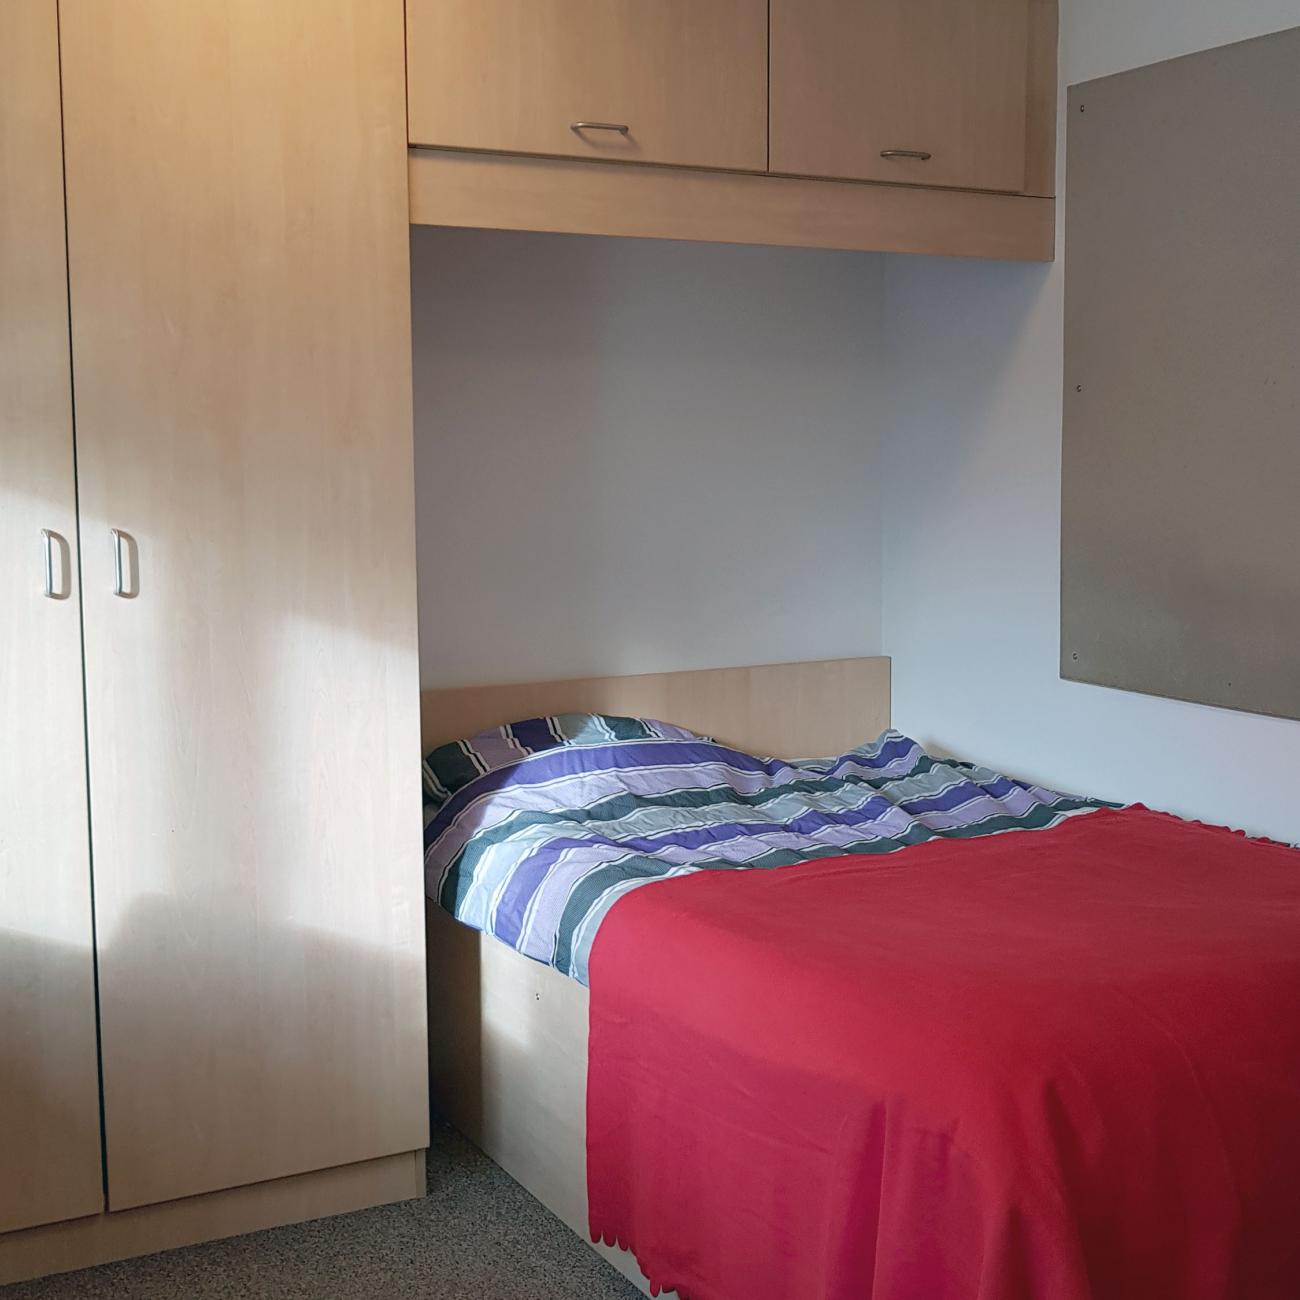 A student bedroom showing large double bed with red bed sheets, full height wooden wardrobes and cupboards. Light streams in through an unseen window.